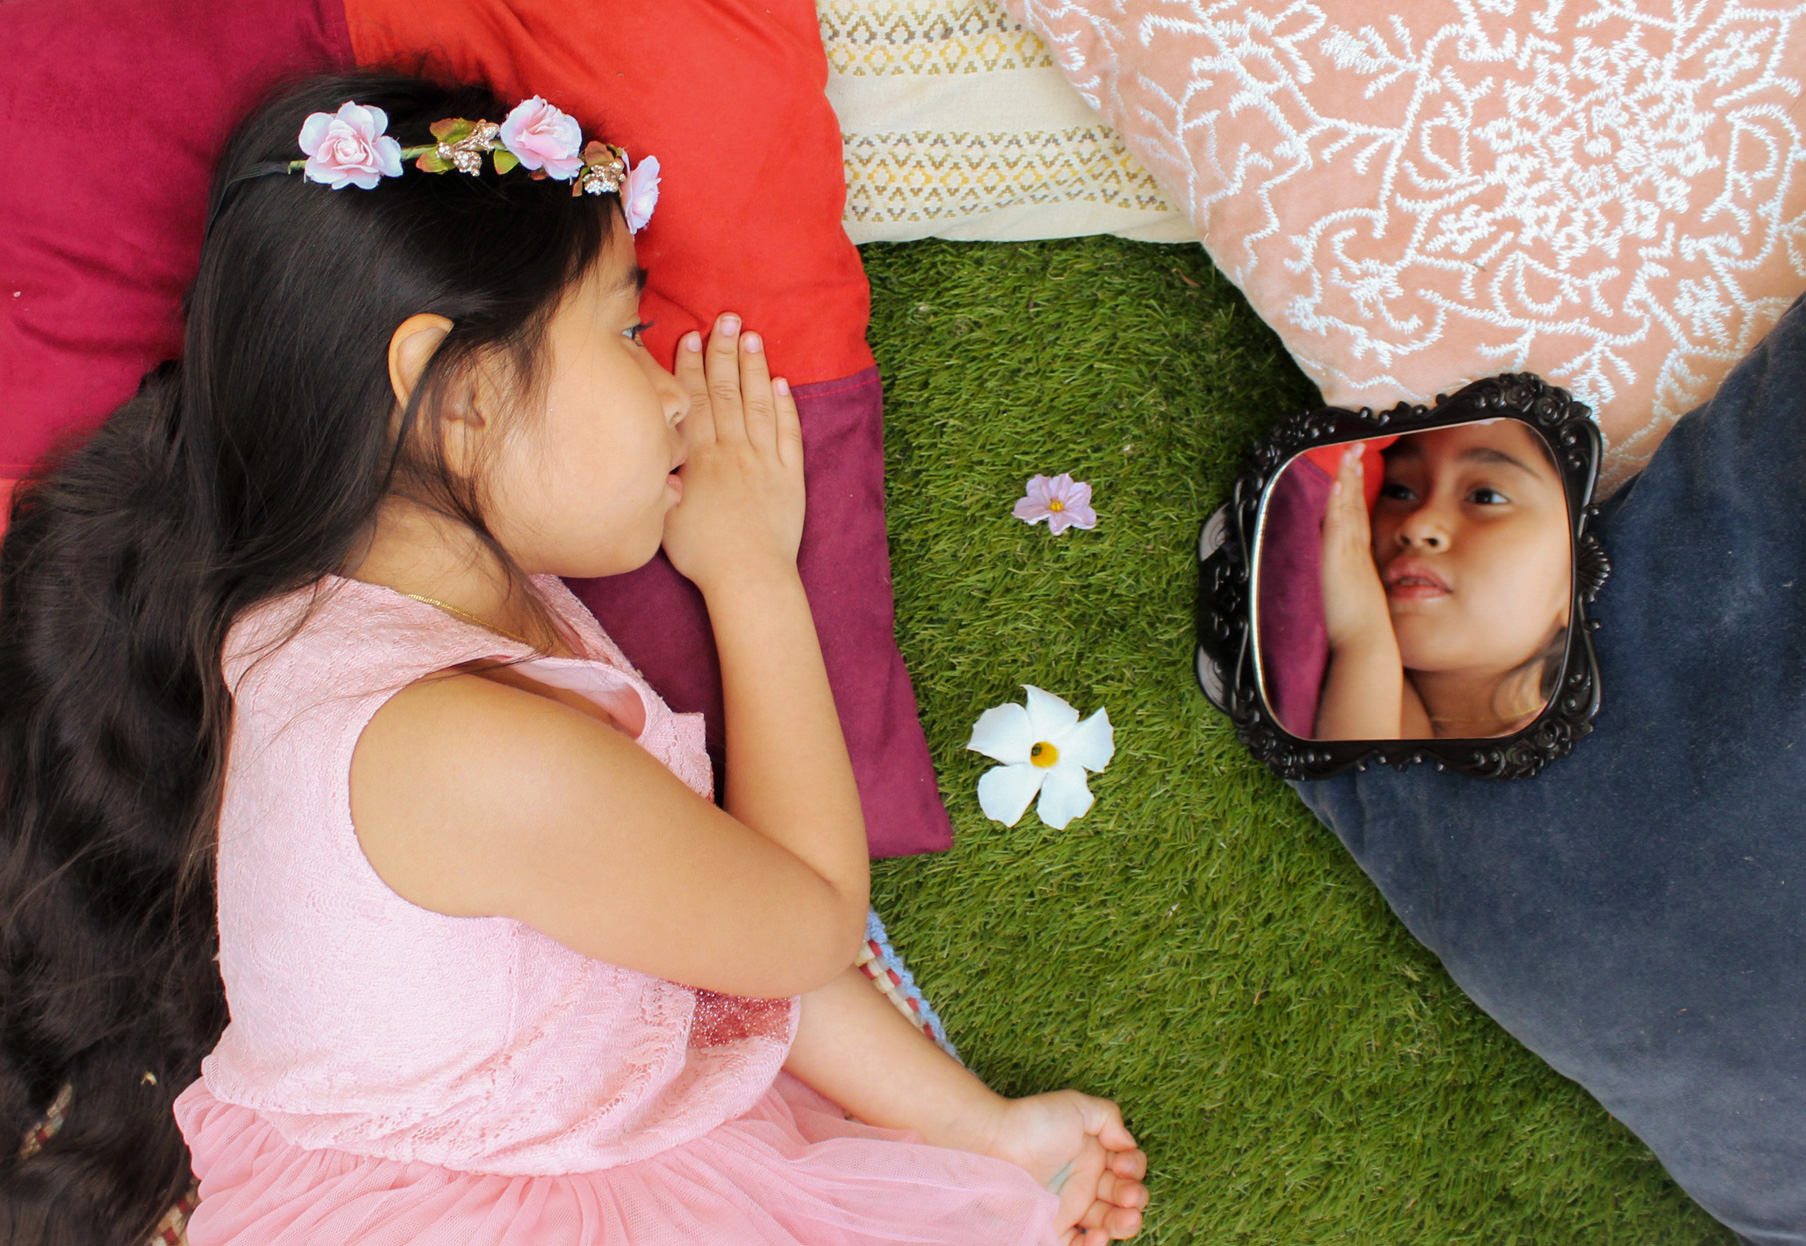 Image description: the artist’s younger sister lying on colorful pillows on grass, looking at her reflection in a small black mirror. Photo by Gaby Salazar, 18.